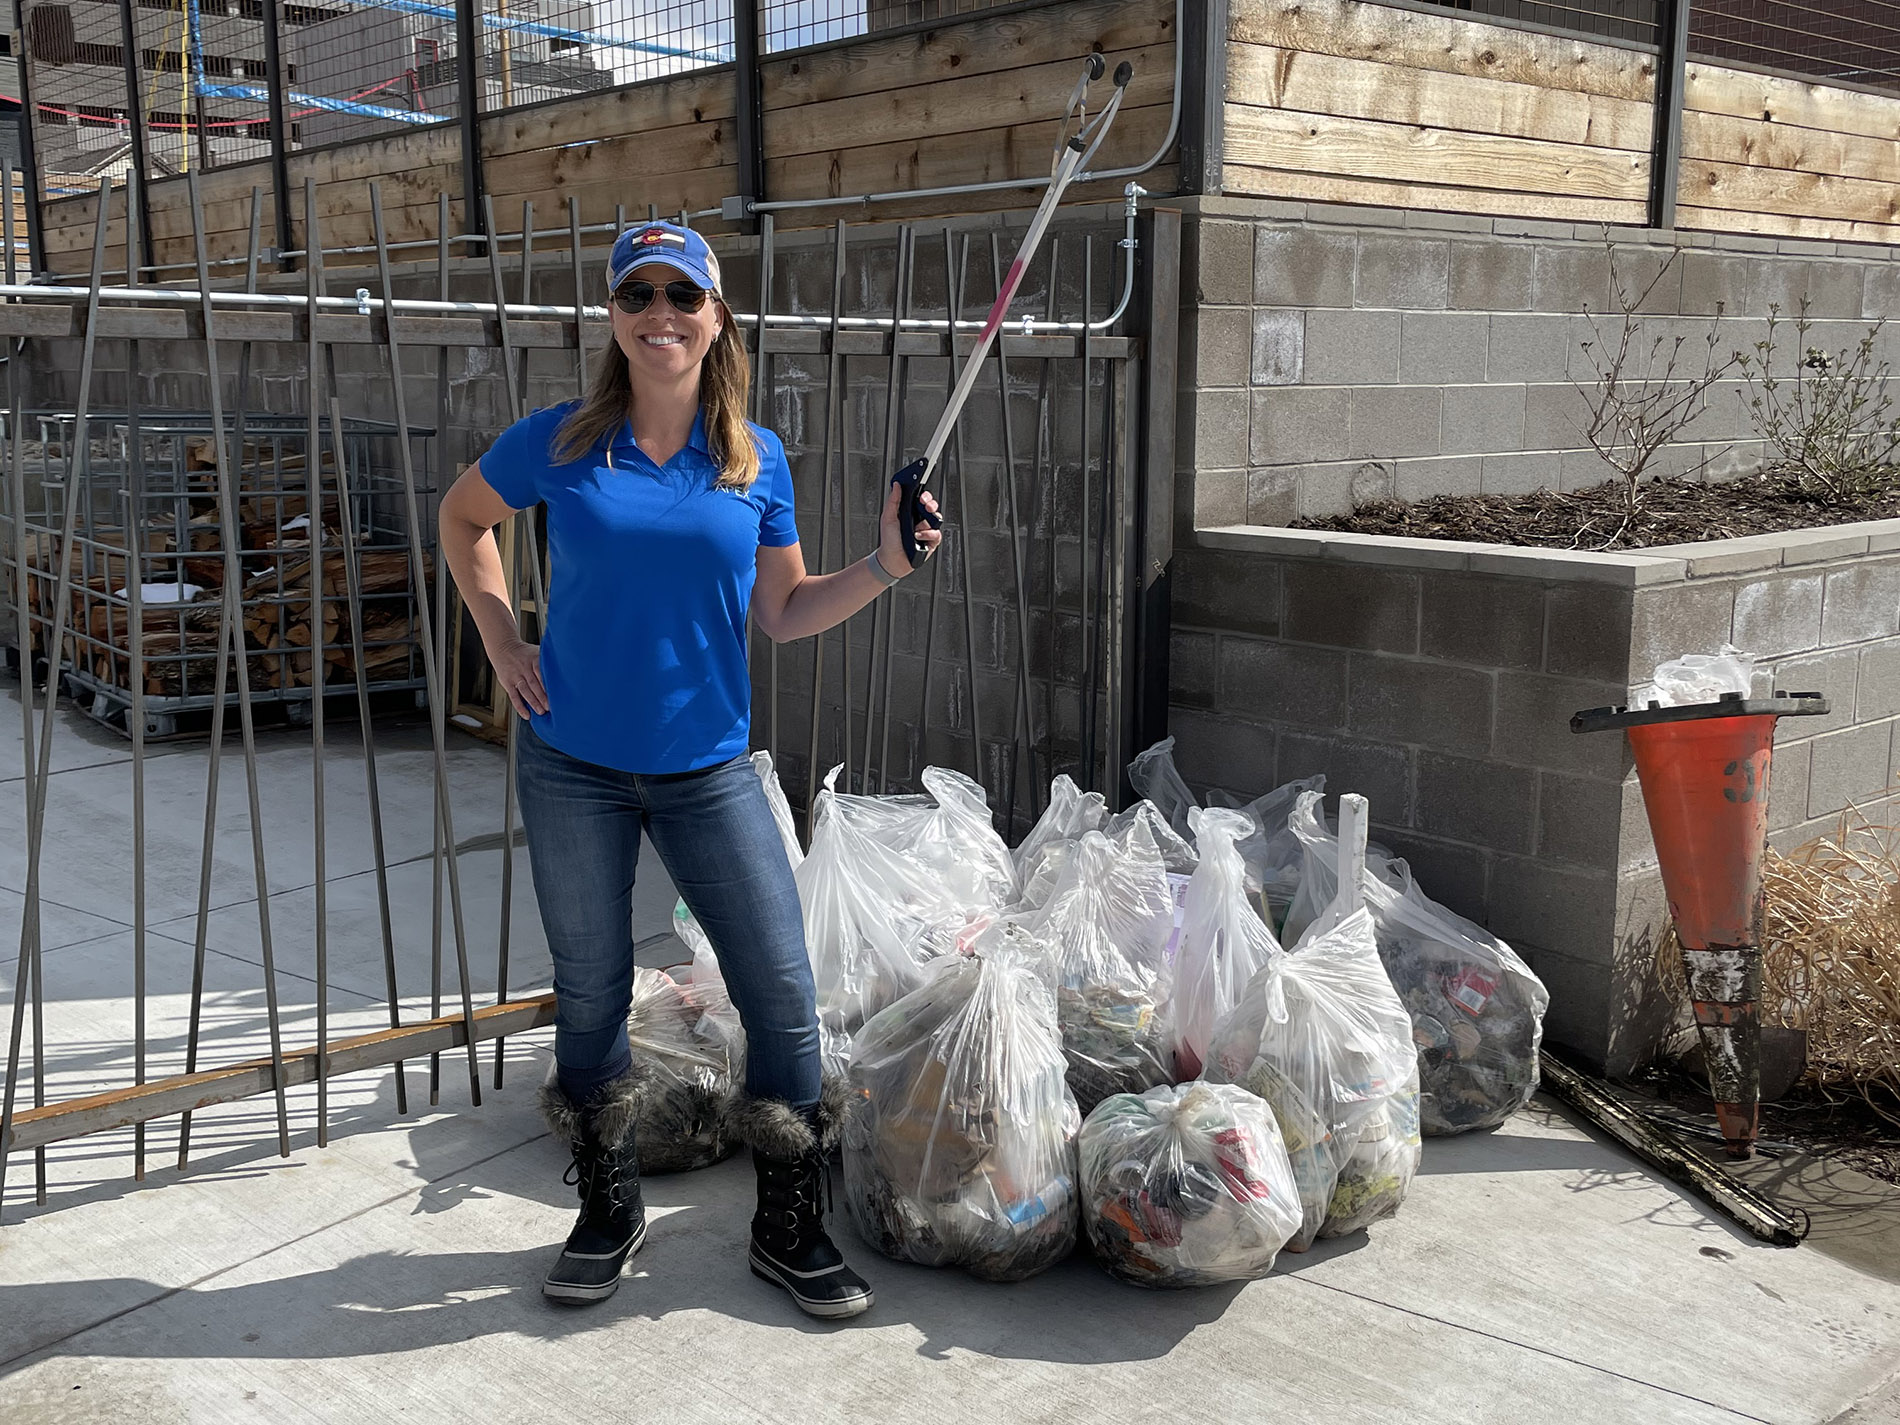 Apex employee donating time to her community to do litter cleanup